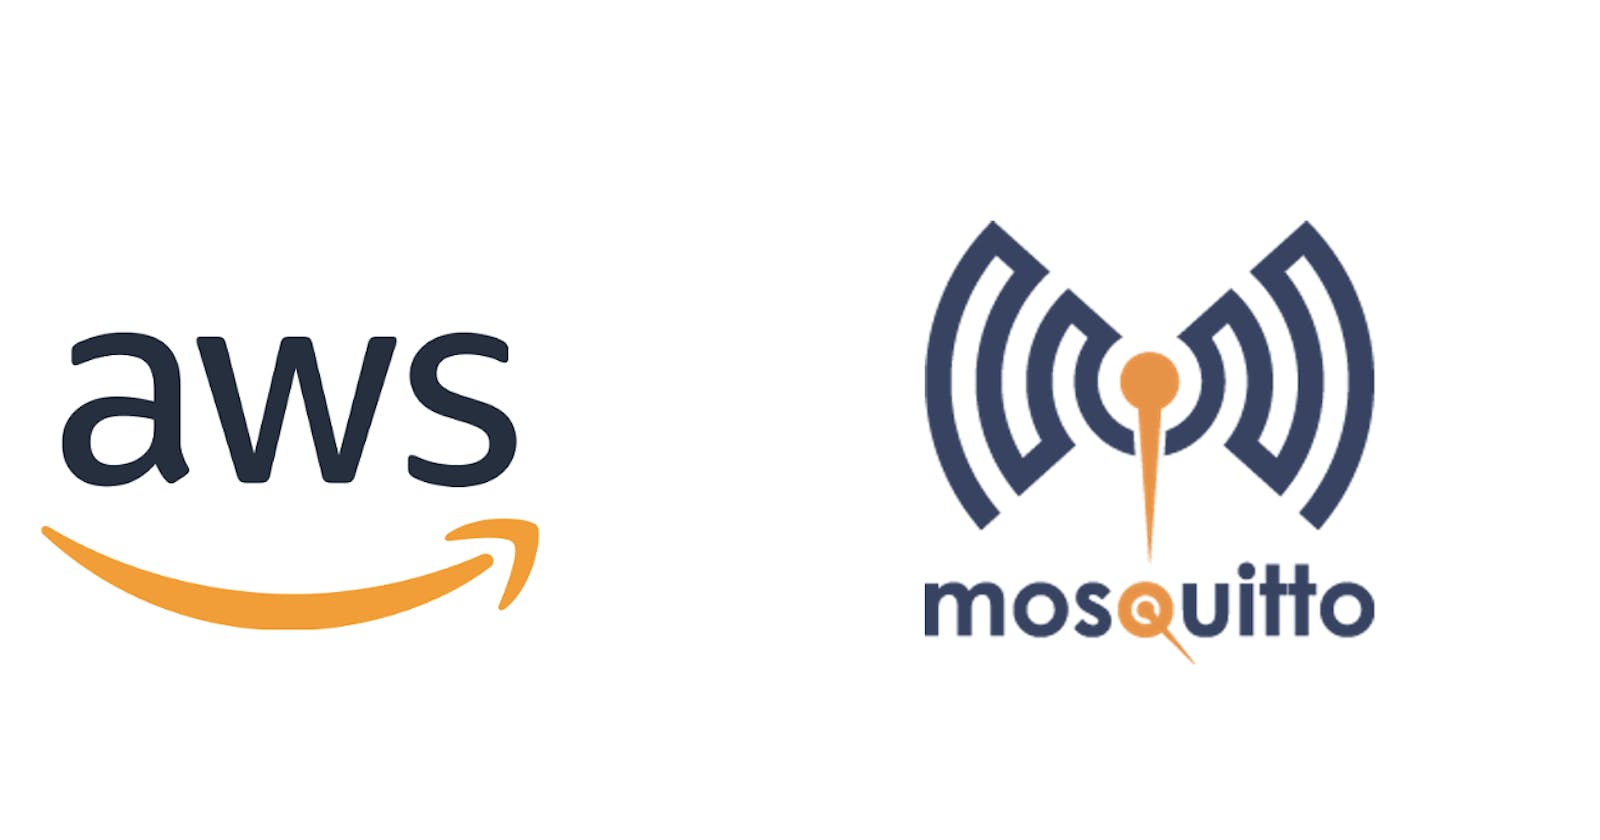 Installing Mosquitto on Amazon Linux 2023